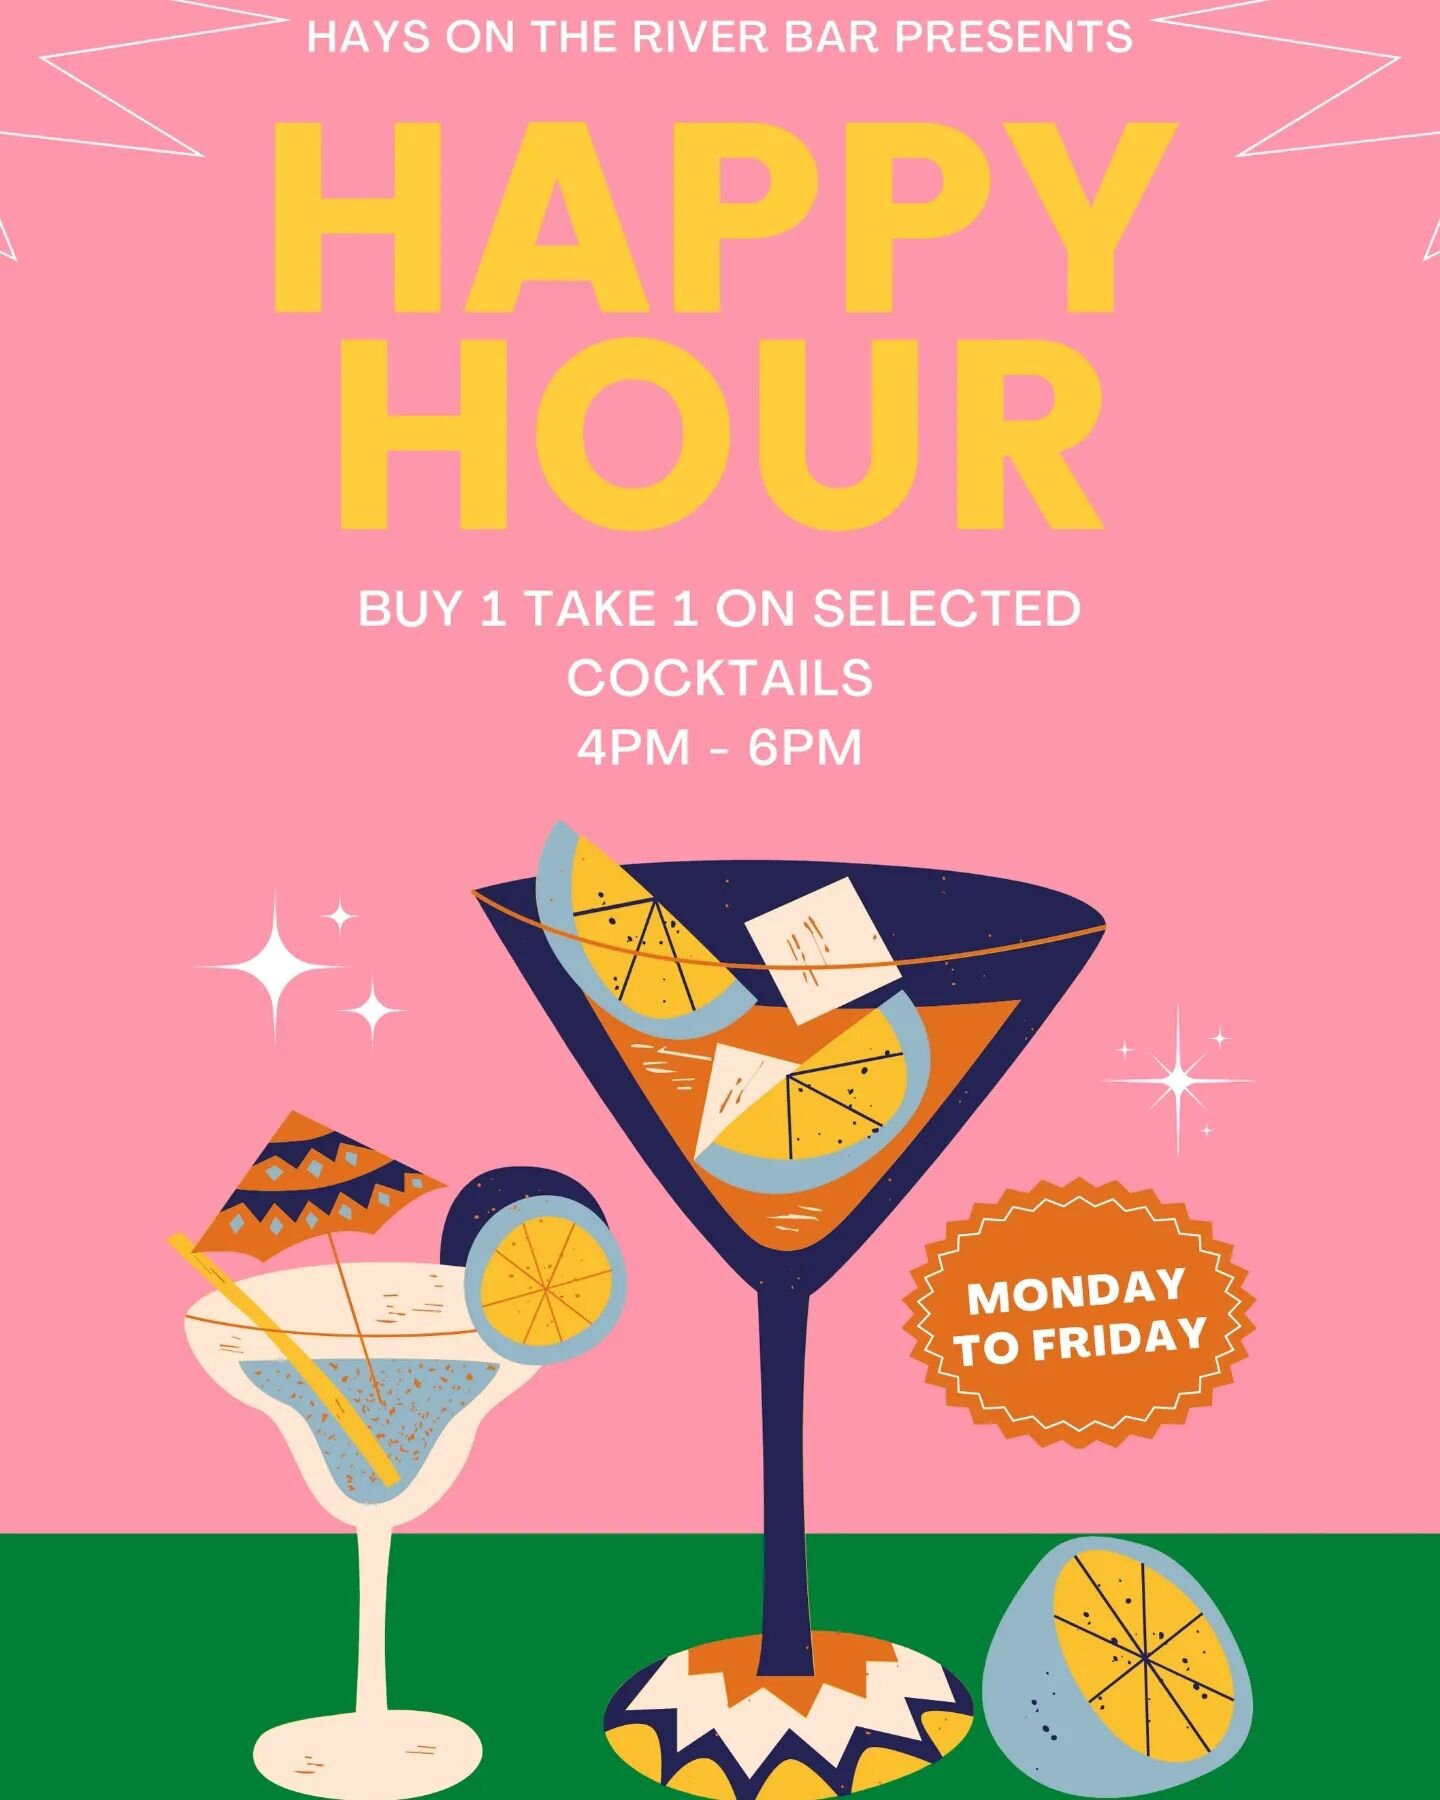 🍹HAPPY HOUR AT HAYS🍹
Buy one, get one free on selected cocktails! You'd be silly not to....

Mon-Fri
4-6pm 

💥